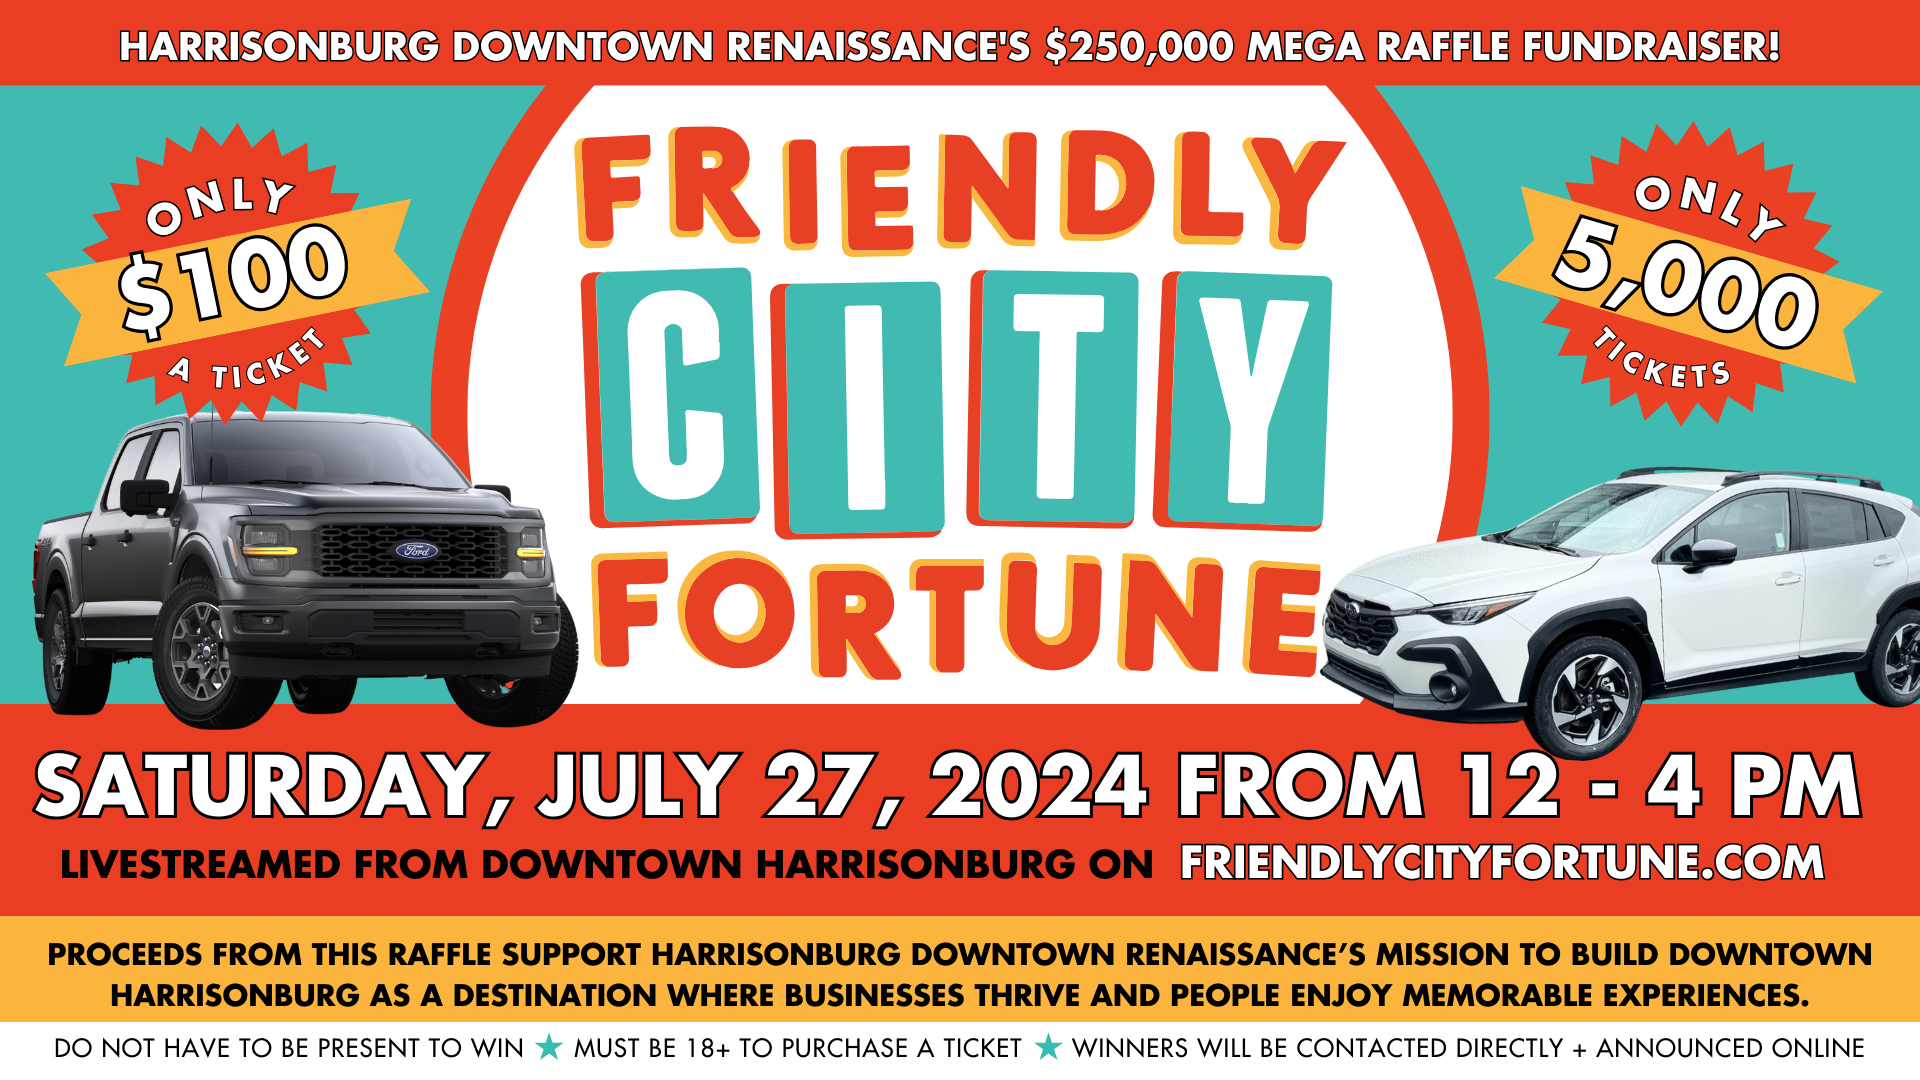 Friendly City Fortune event banner, visit FriendlyCityFortune.com to learn more